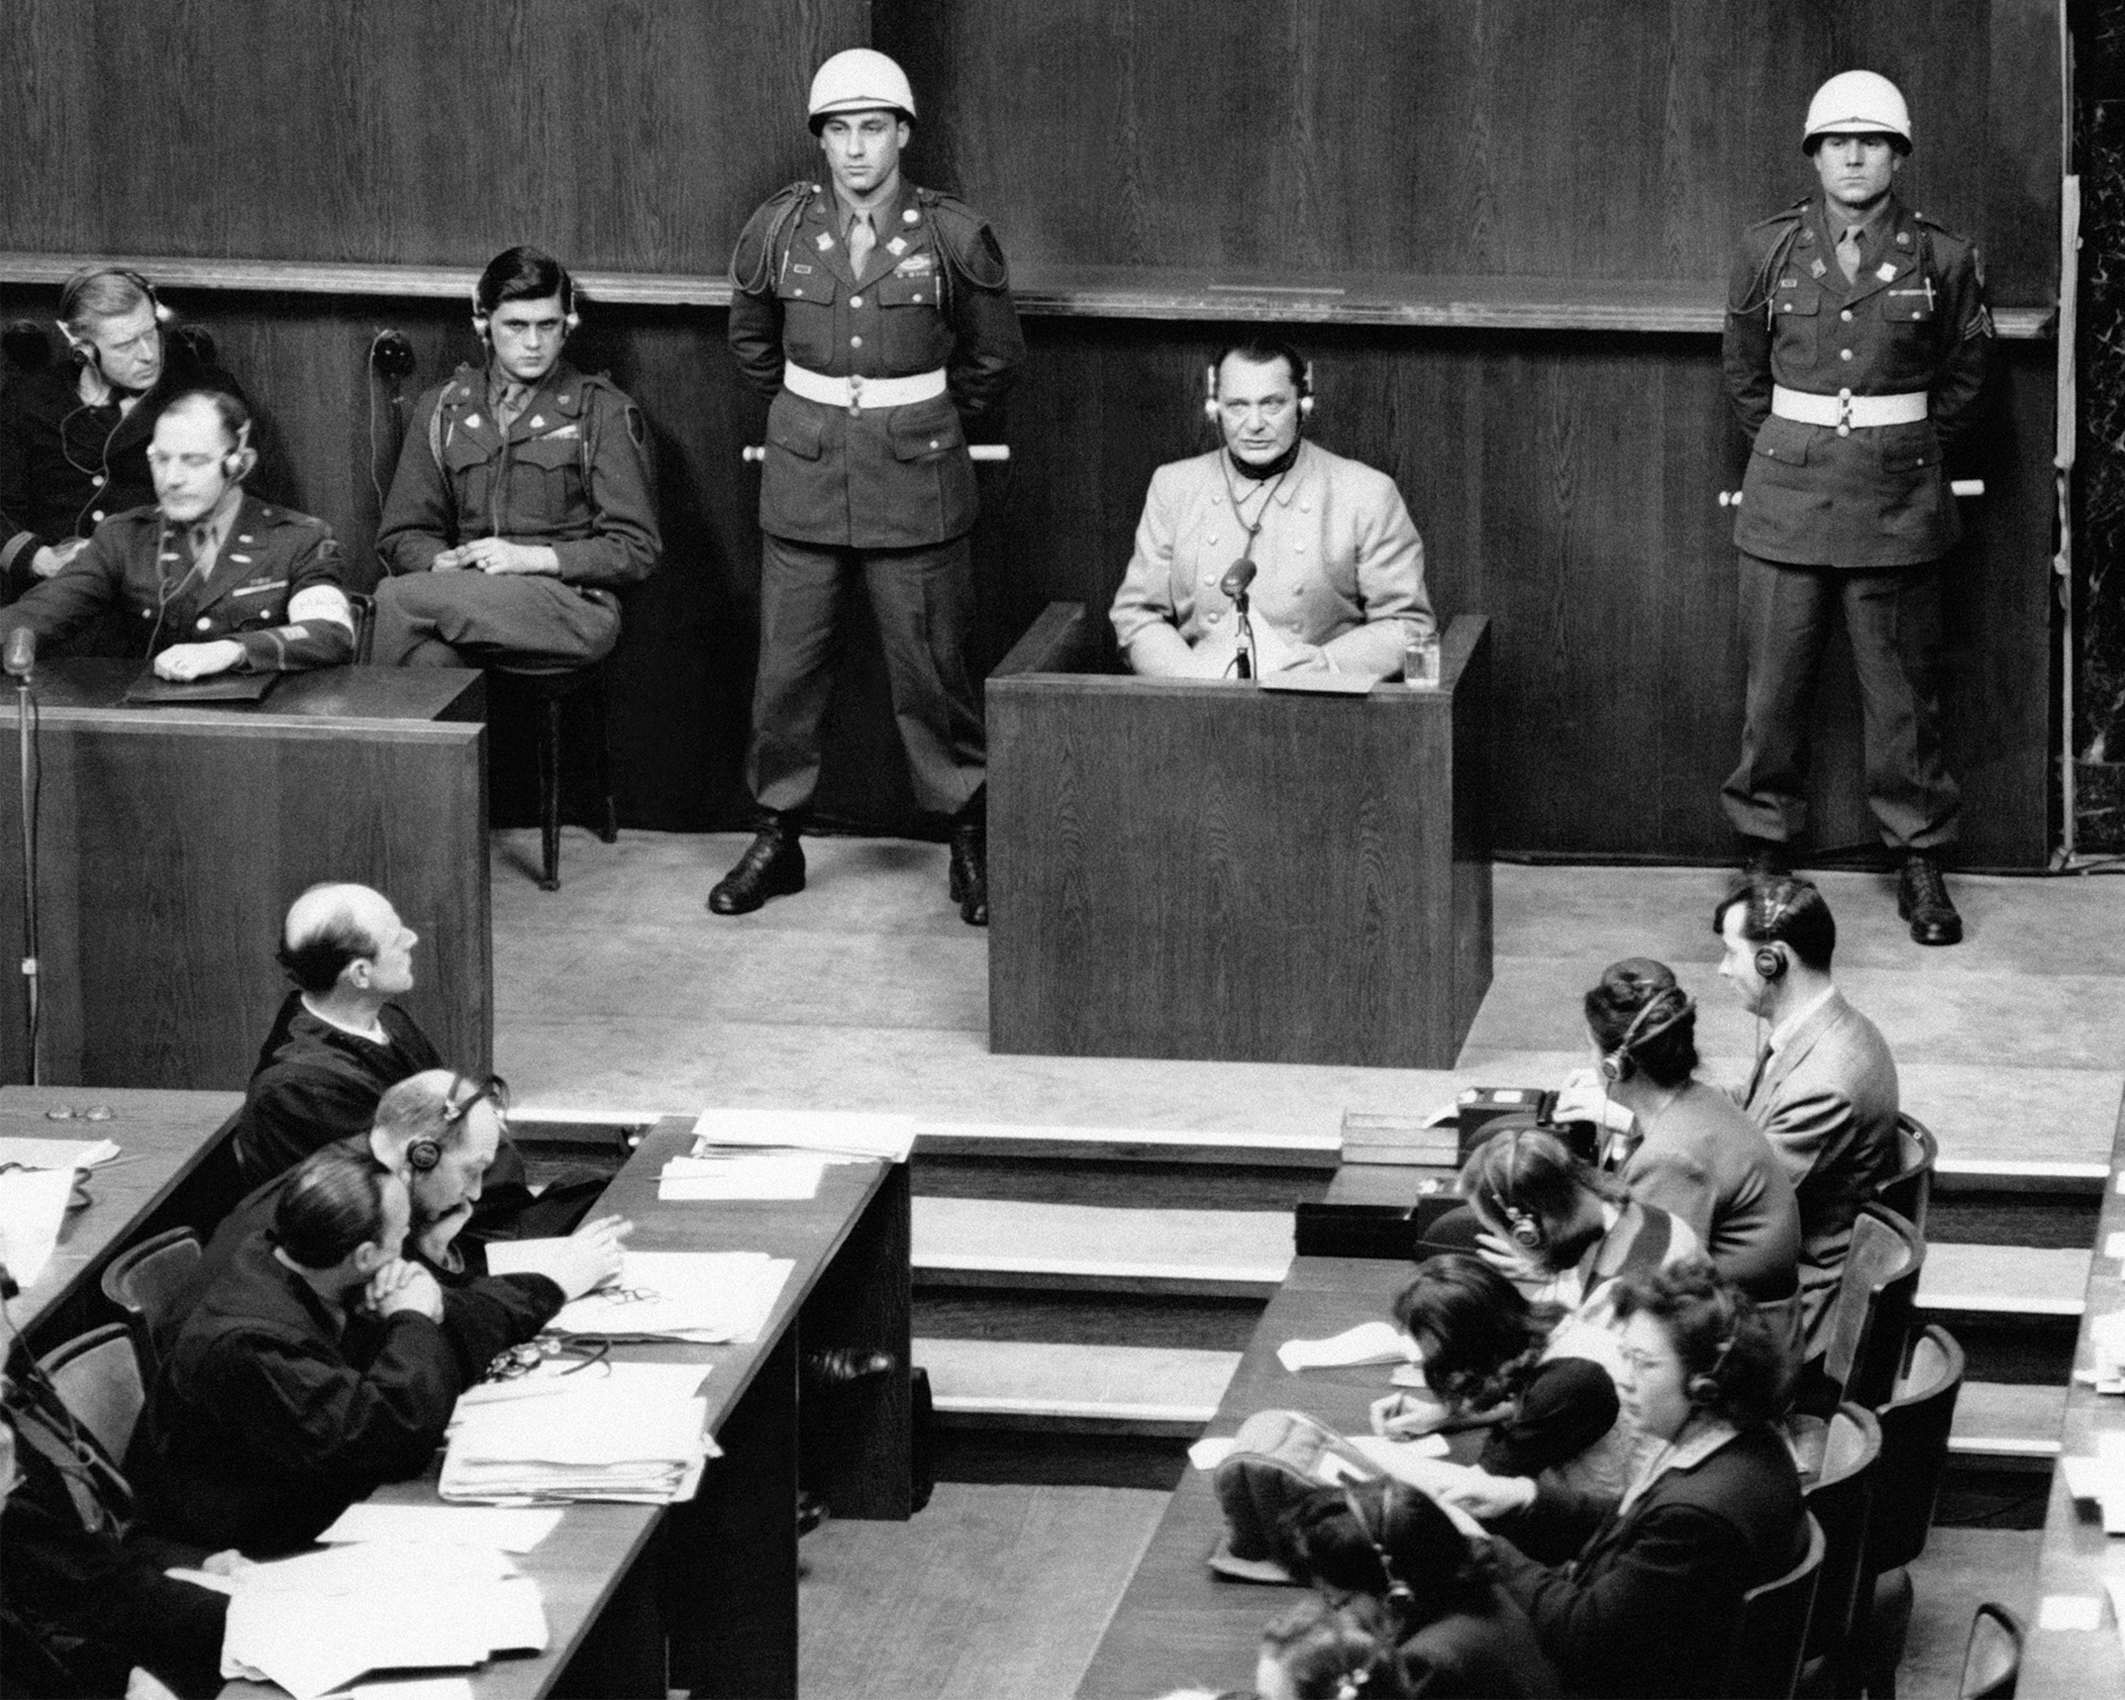 A photo of Nazi leader Hermann Goering sitting in the defendent box accused of crimes against humanity, among other charges, at the Nuremberg Trials in Germany on March 16, 1946.